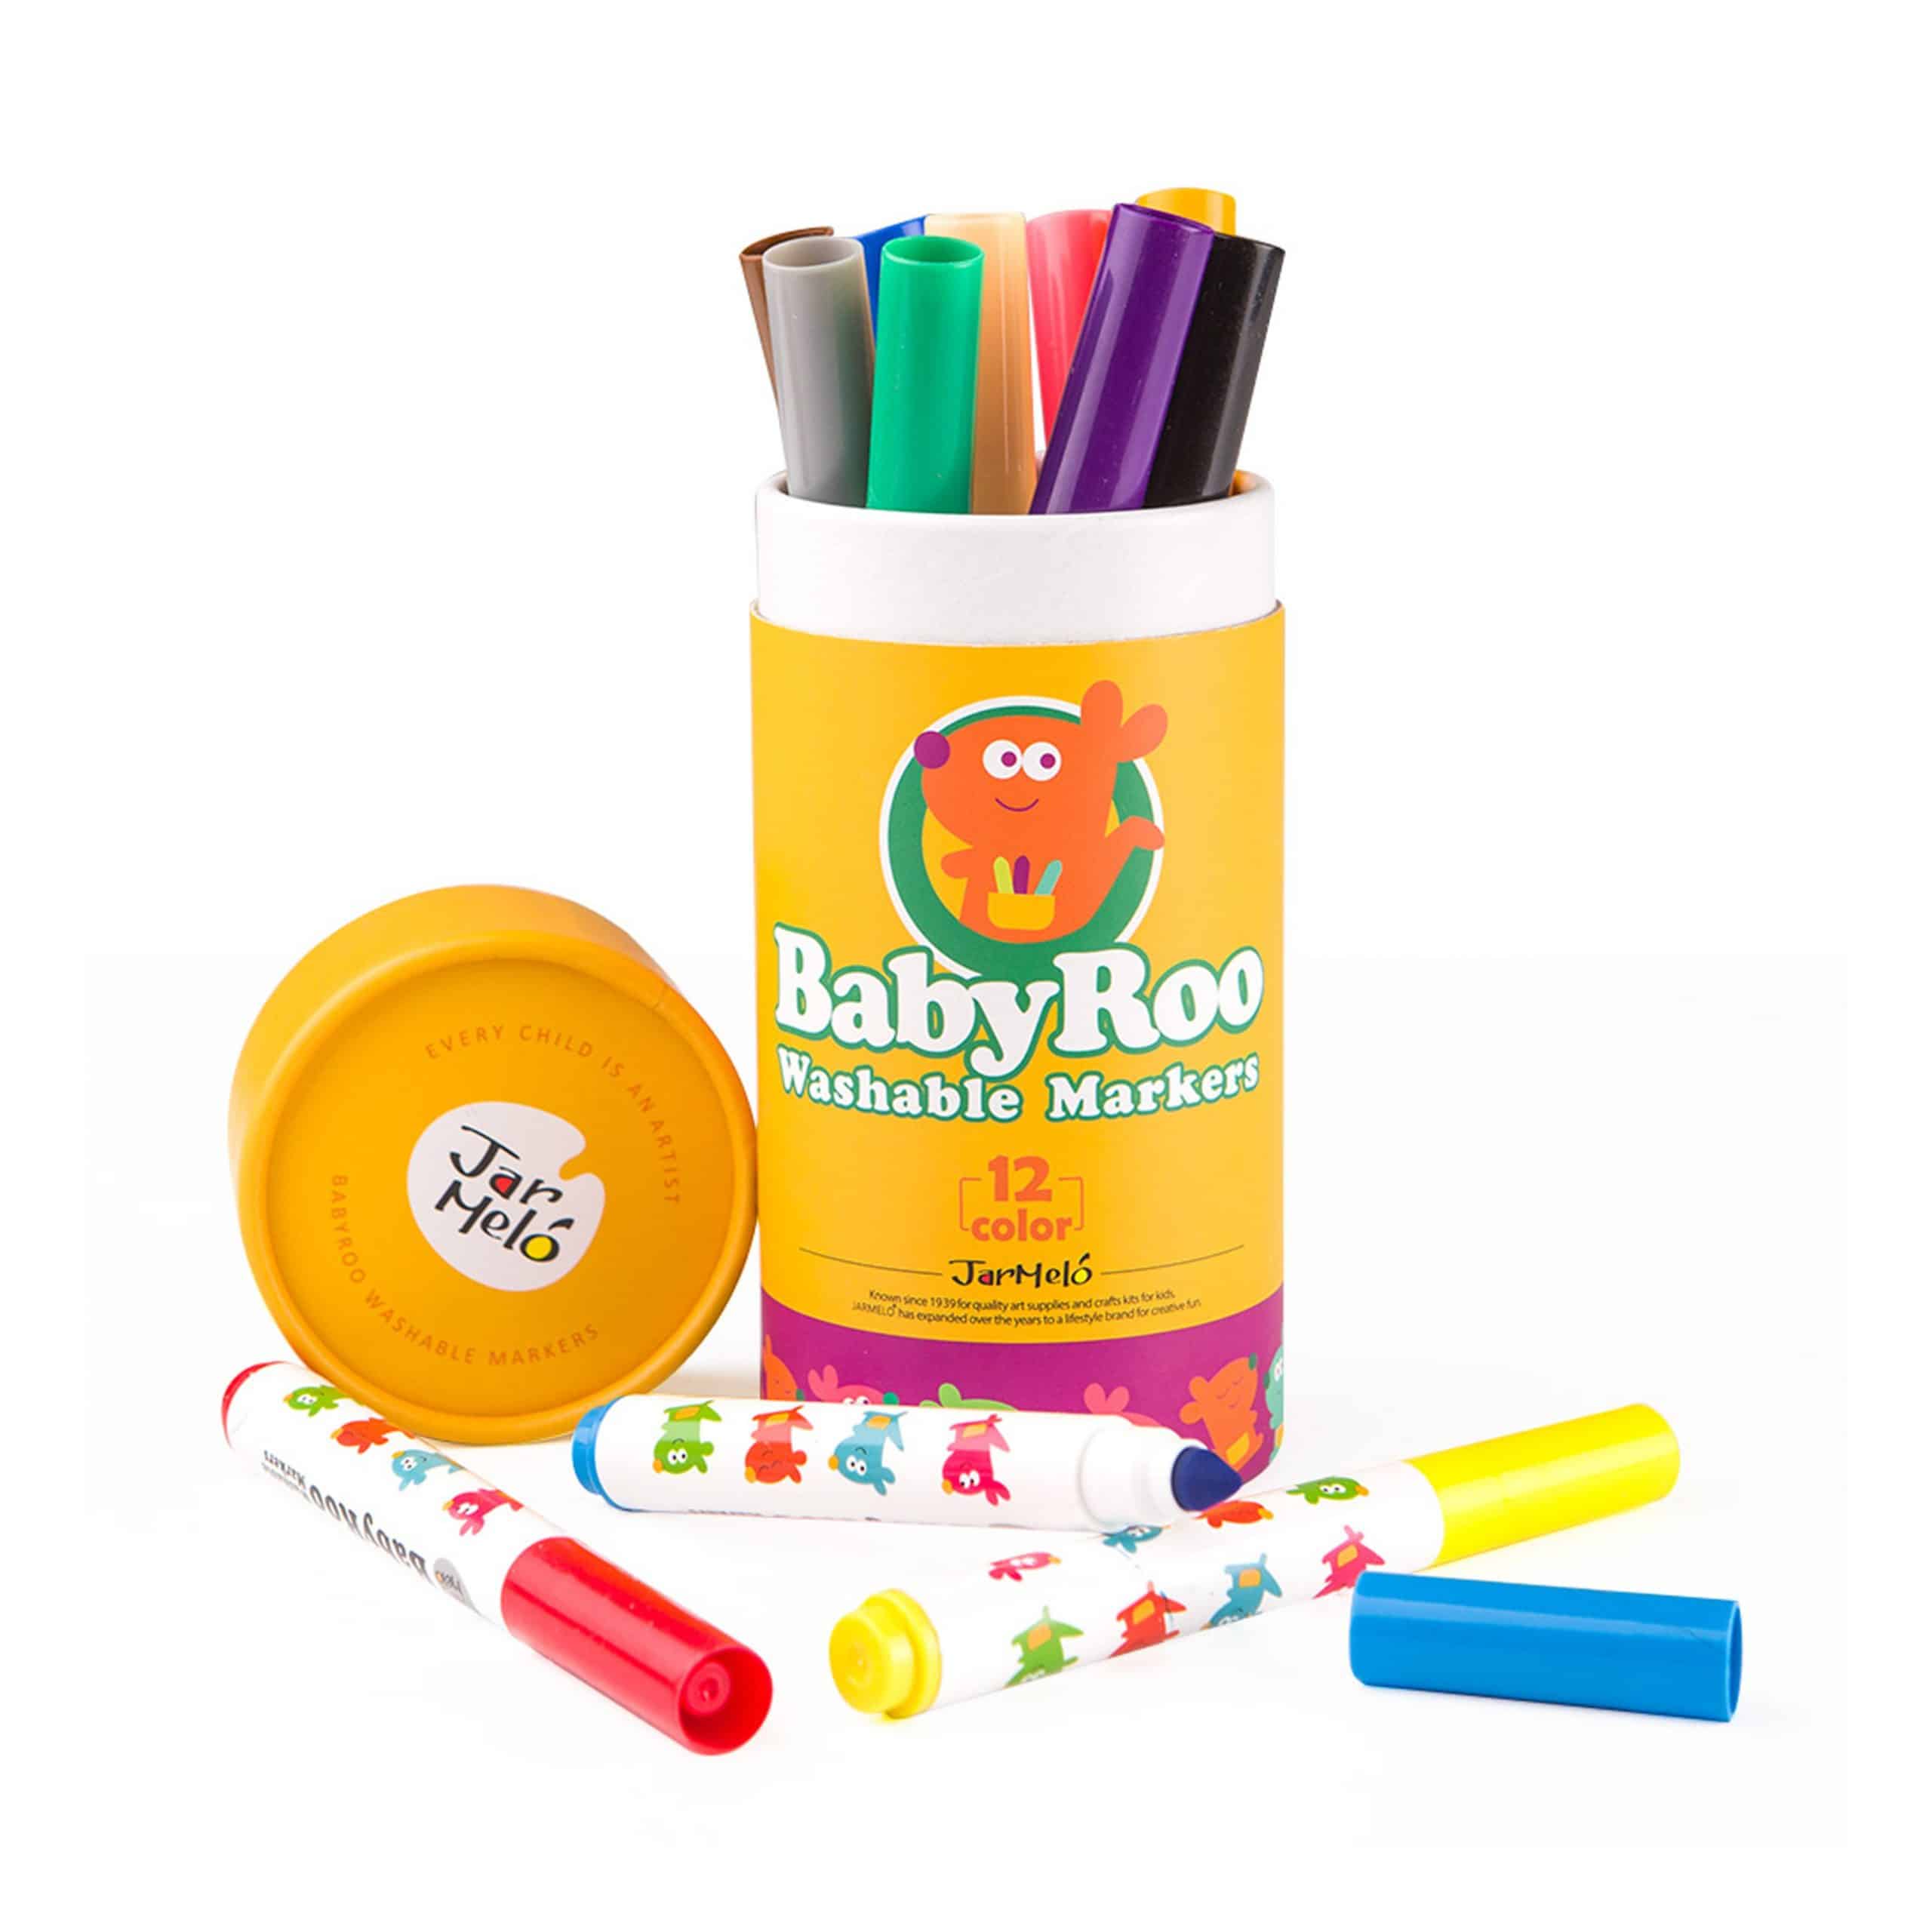 Washable Marker Baby Roo JarMelo 1598156276 scaled | Trio Kids Singapore | December, 2022